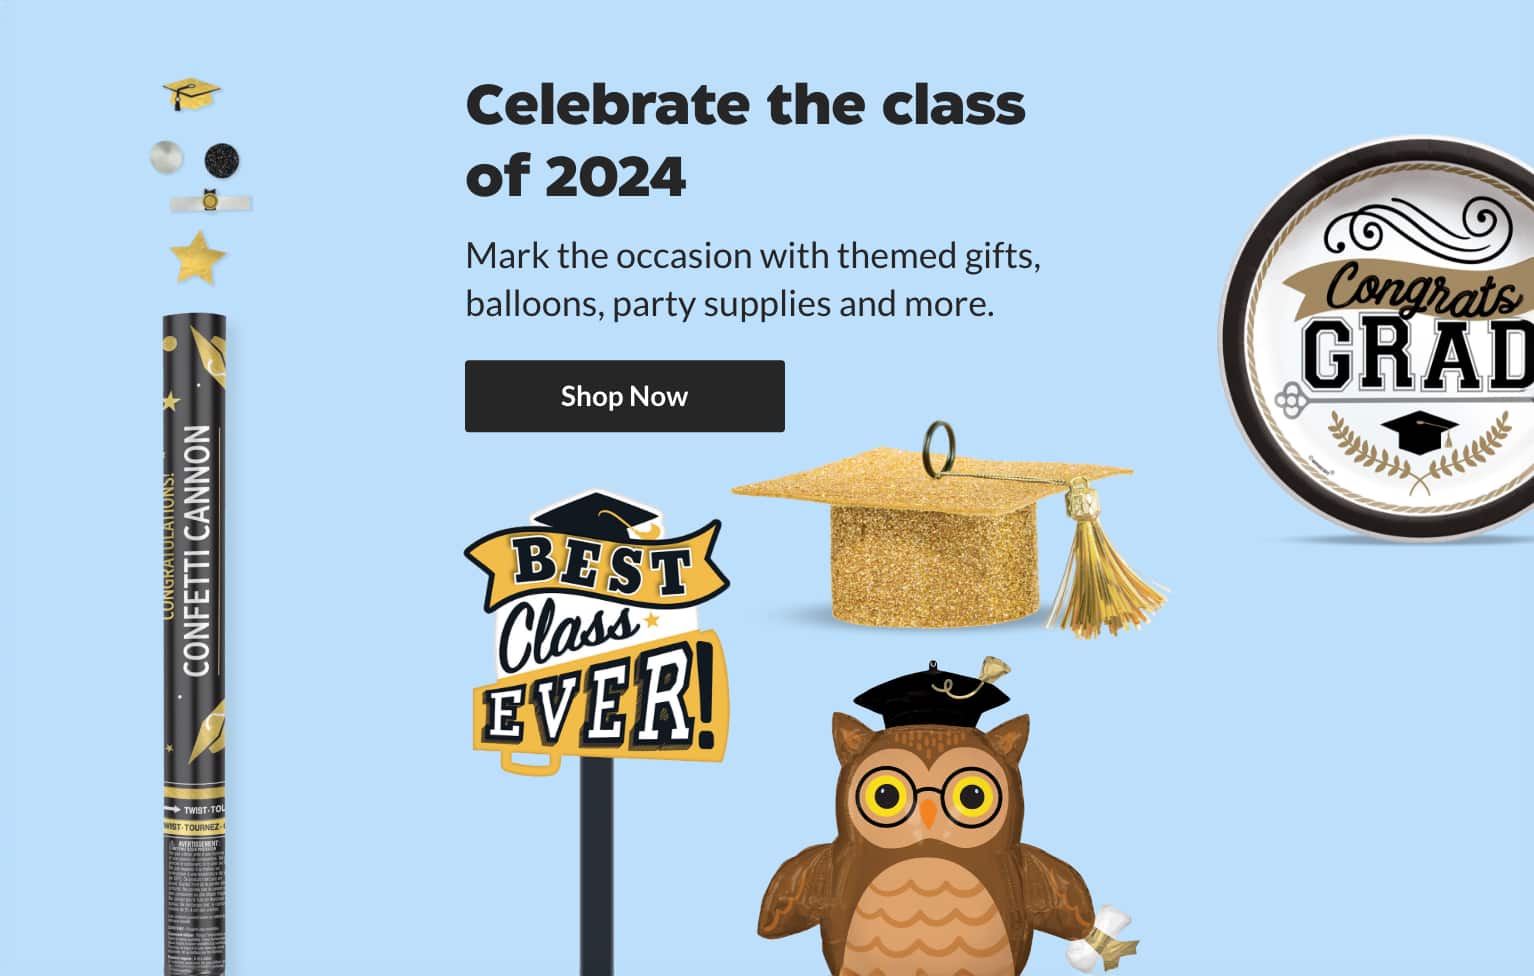 An assortment of decor items for a graduation party, including banners, serveware and stuffed toys.